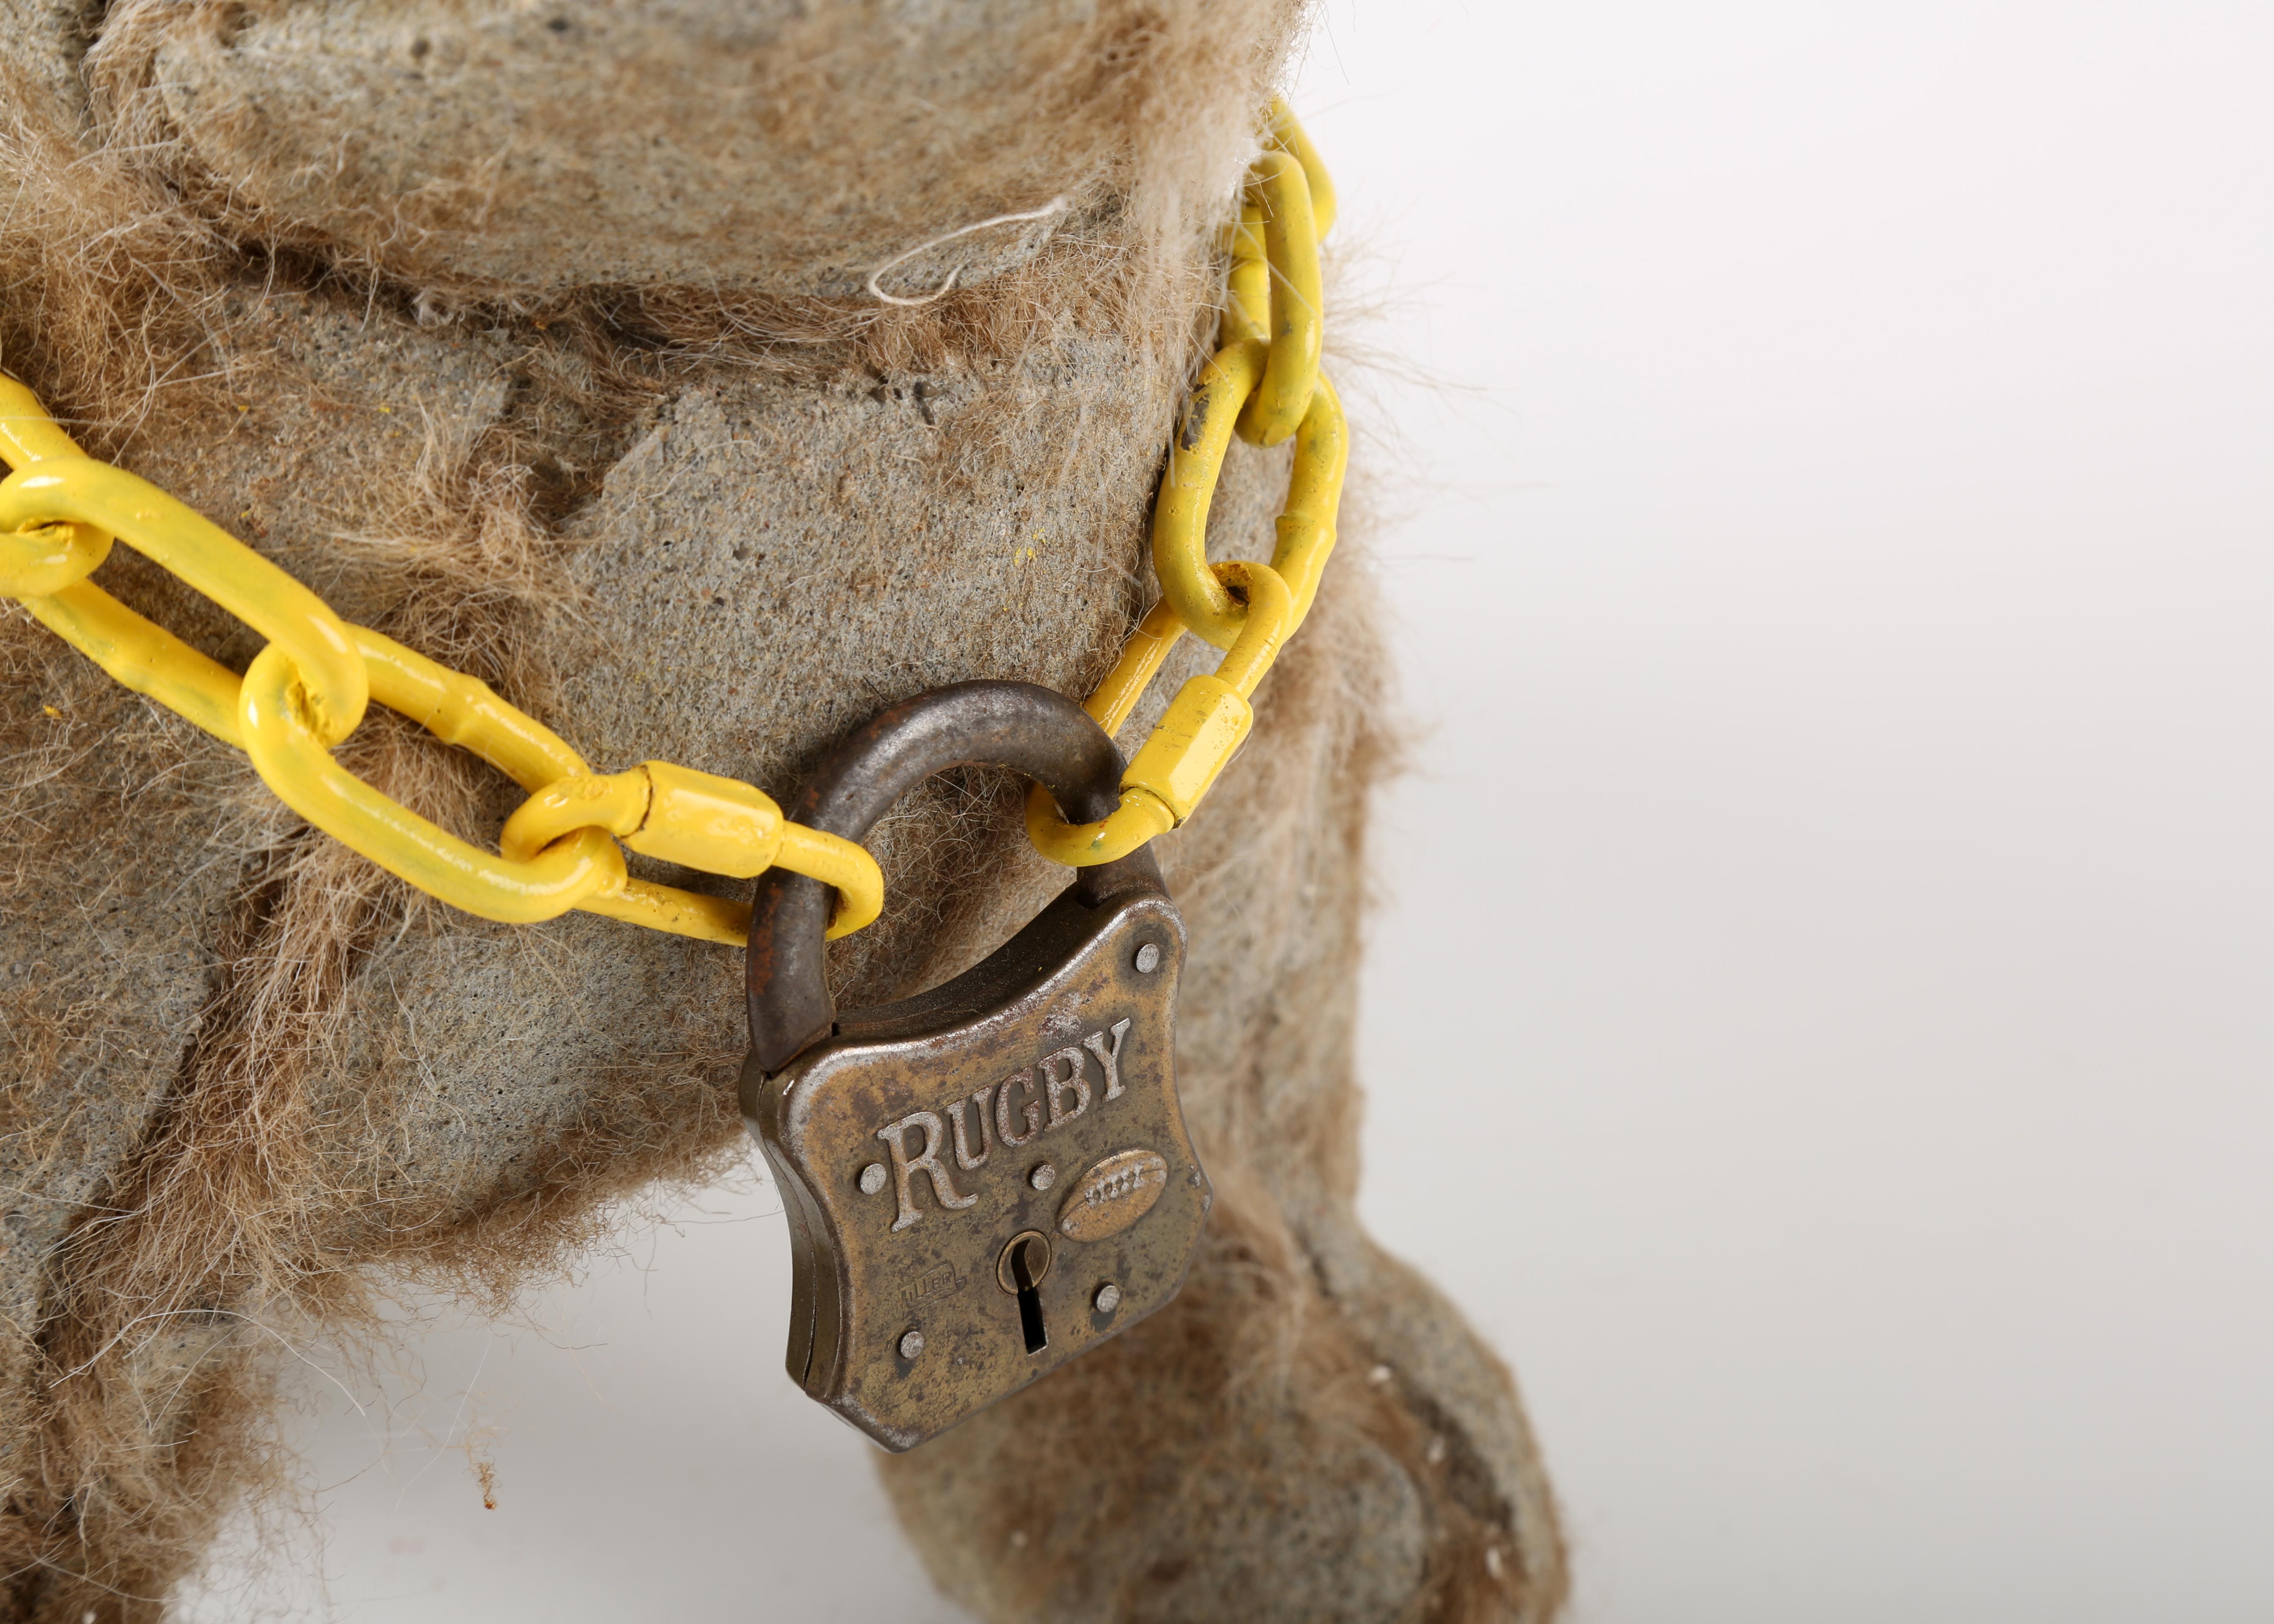 Ross Bonfanti
Rugby with yellow chain, 2015
Concrete, mixed media
15 1/2 x 17 x 10 inches  (39.4 x 43.2 x 25.4 cm)